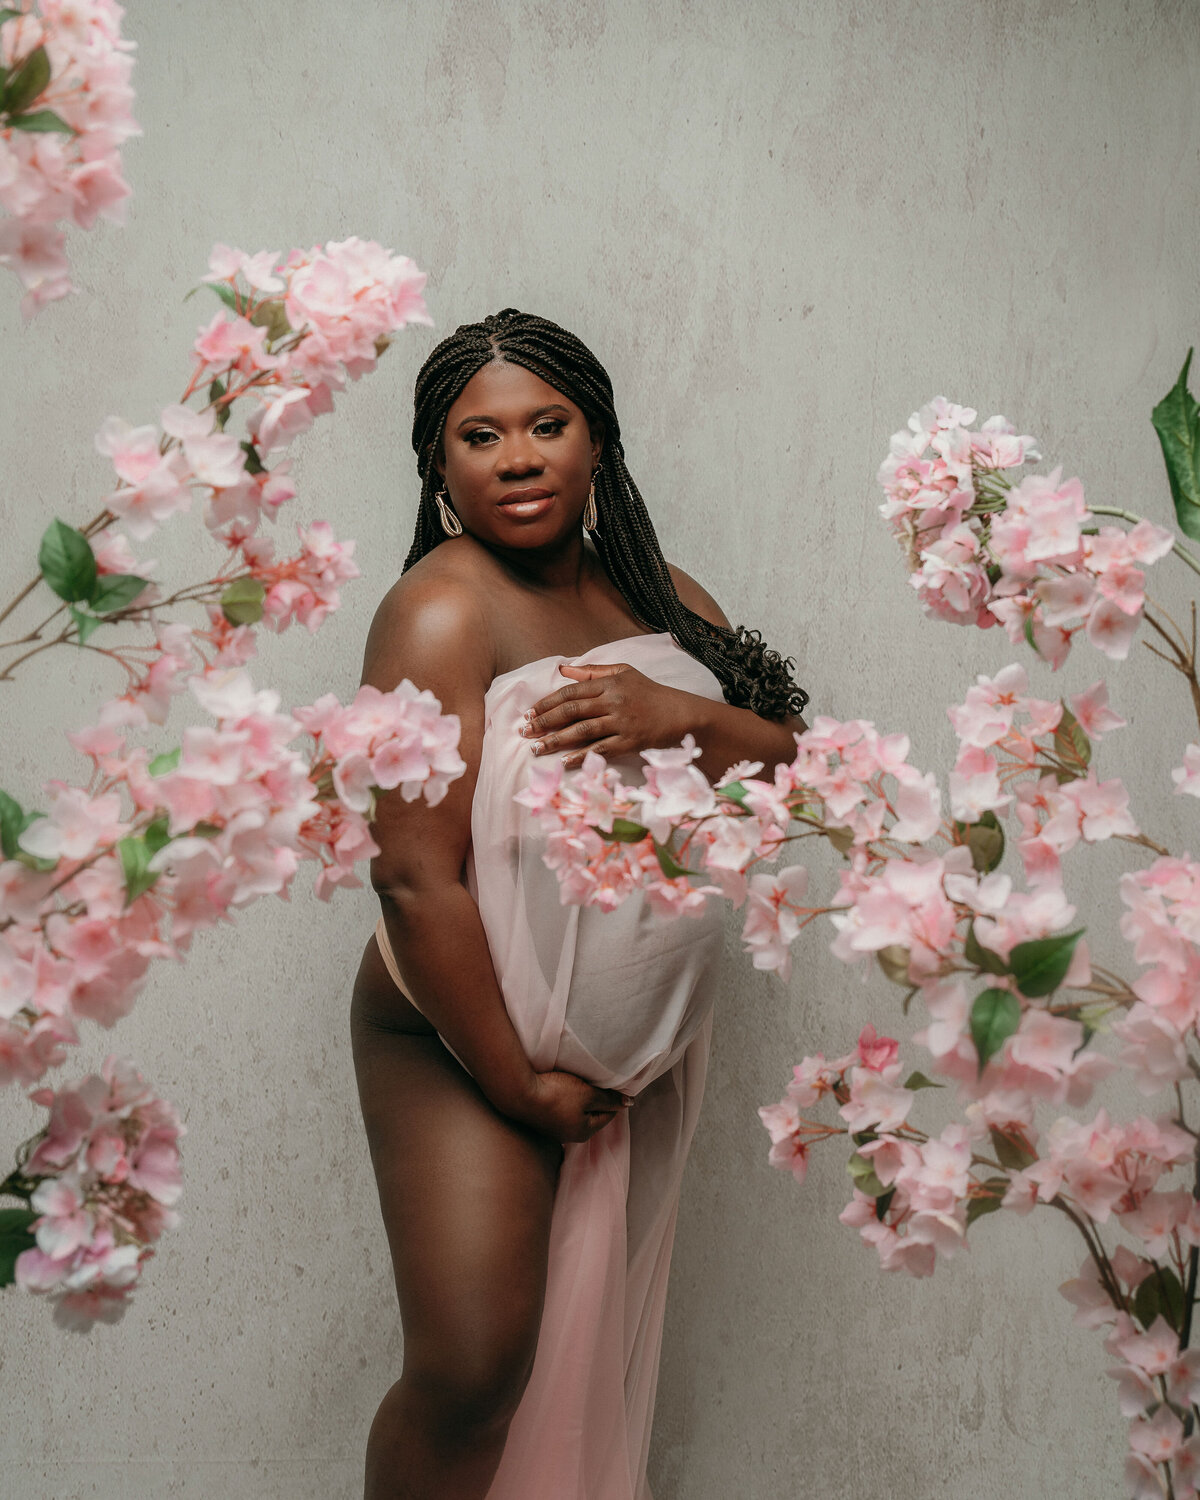 Pregnant woman nude wrapped in silk fabric holding her baby bump on off white backdrop and pink flowers all around her